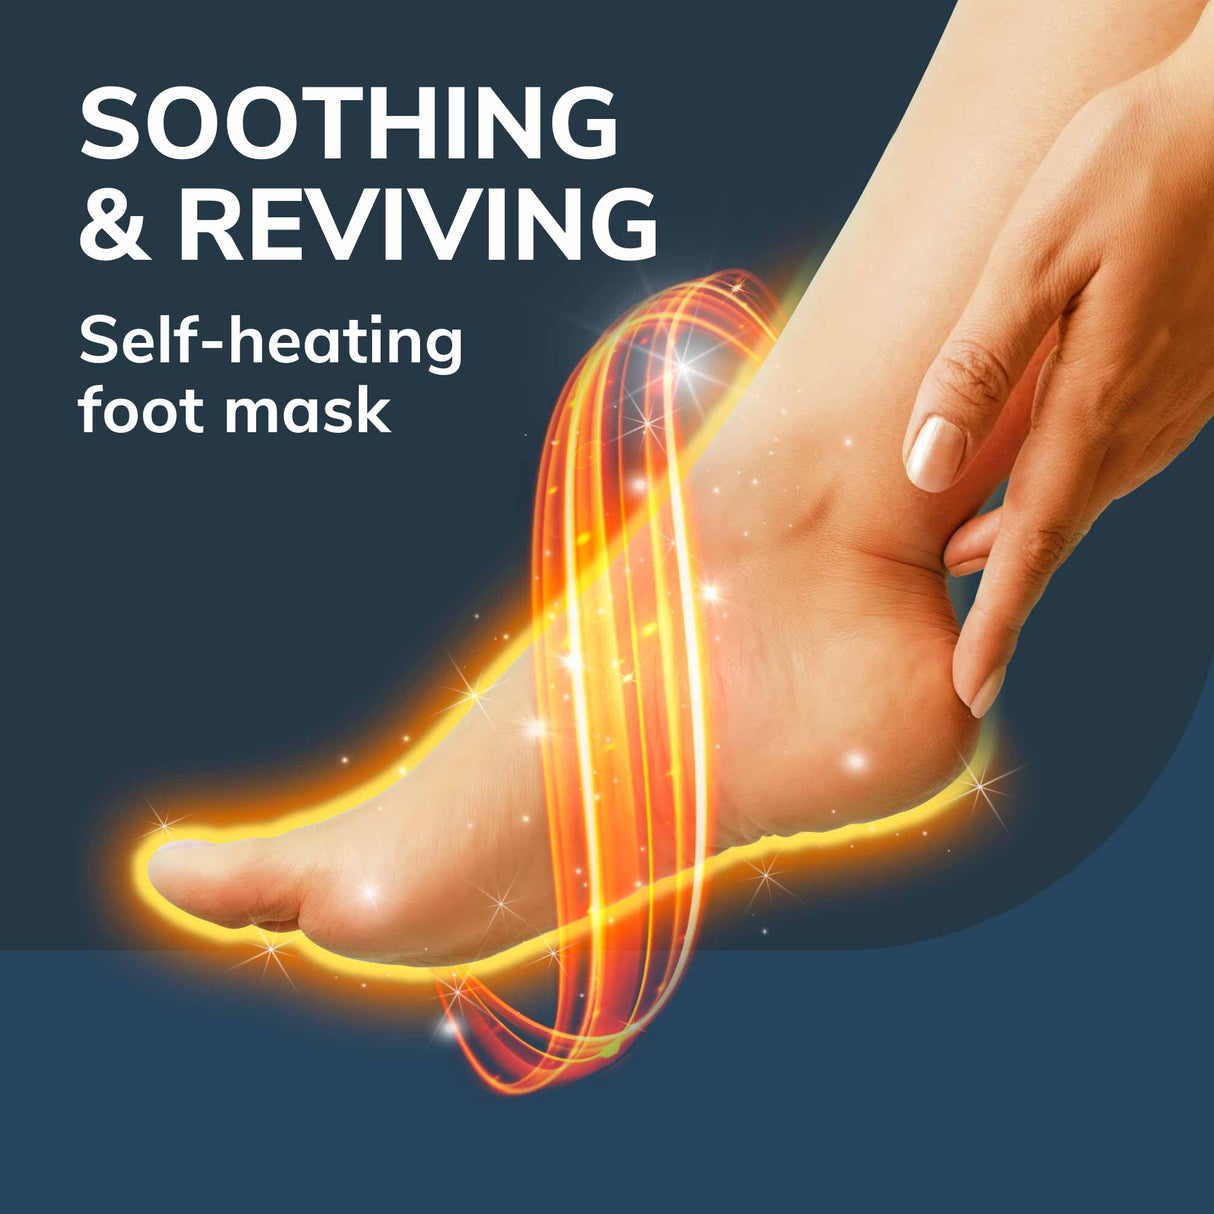 image of soothing and reviving self-heating mask